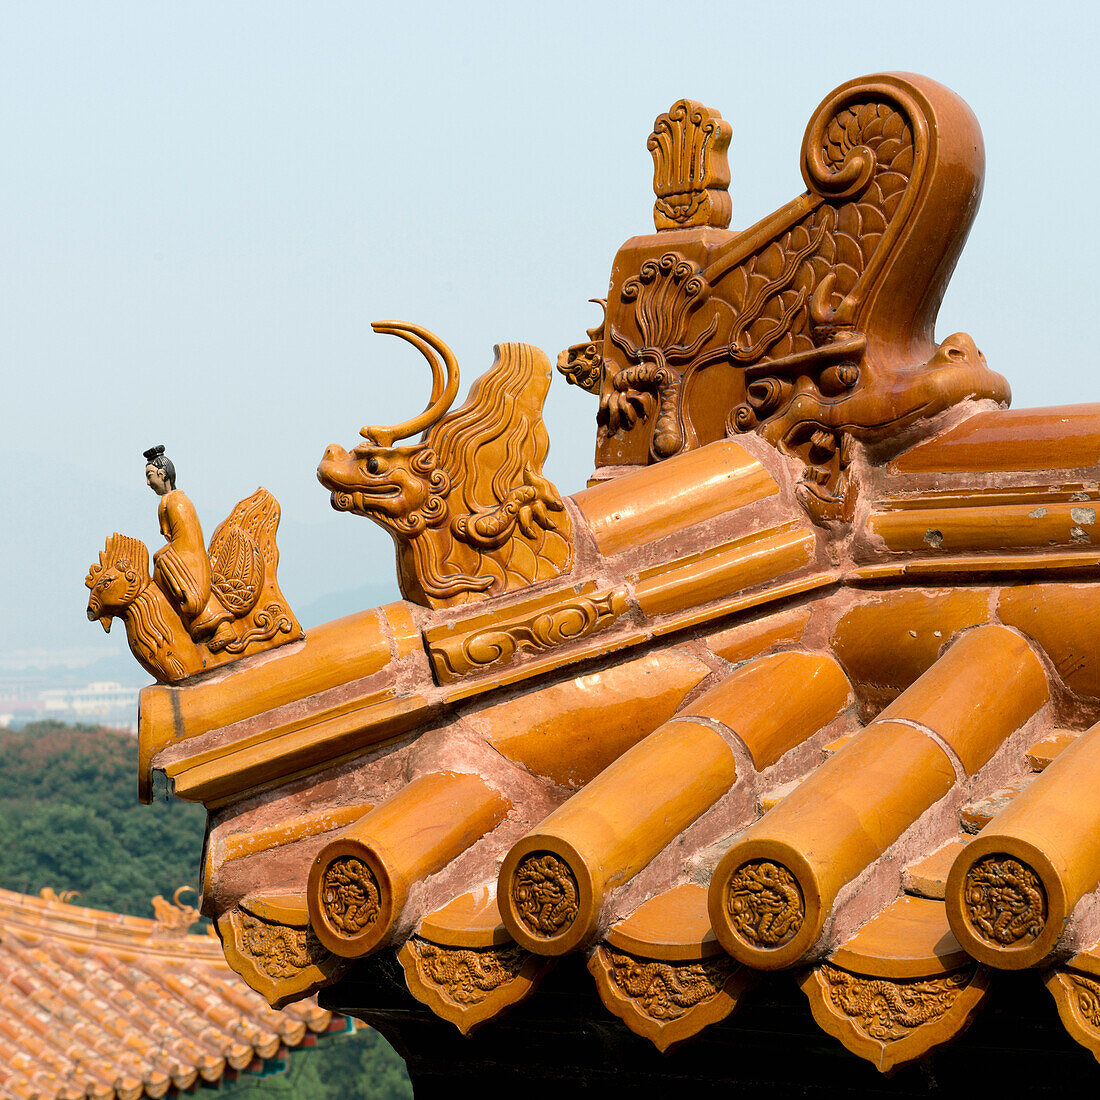 Ornate detail on a roof